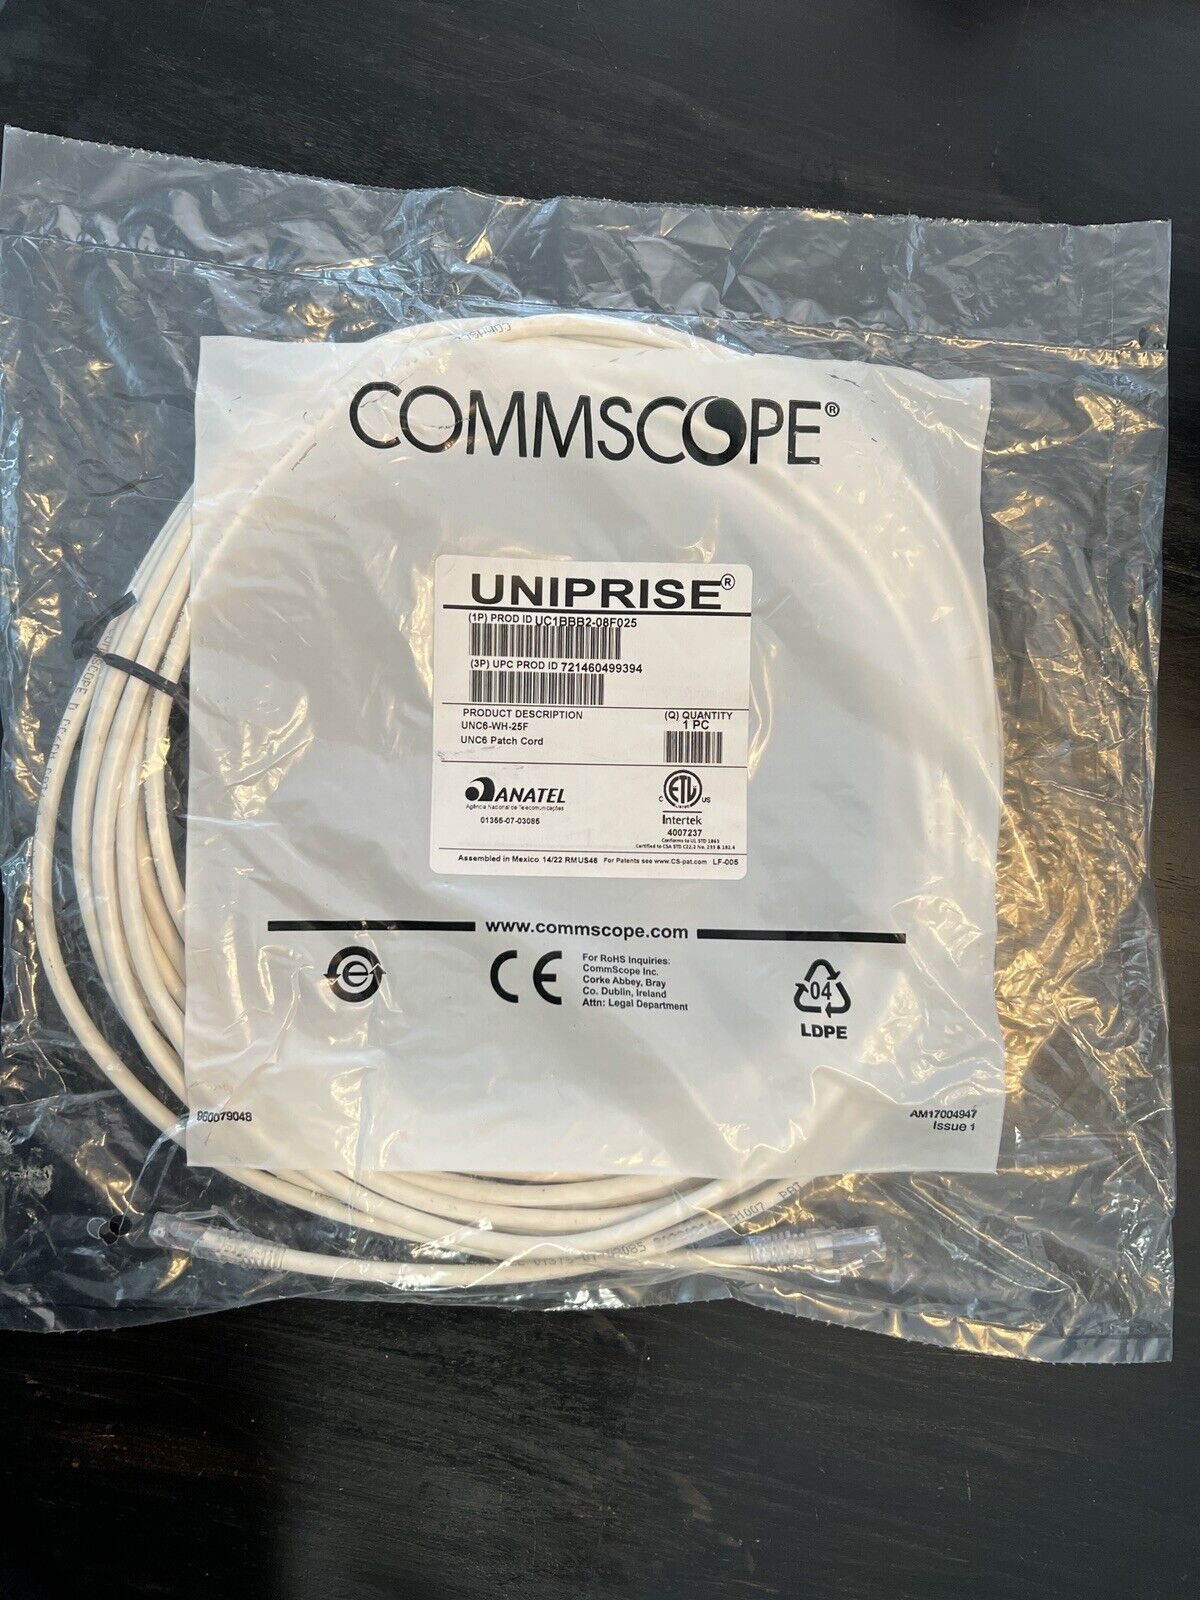 25 ft Commscope white CAT 6 ethernet patch cable. UNC6-WH-25F. UC1BBB2-08F025.